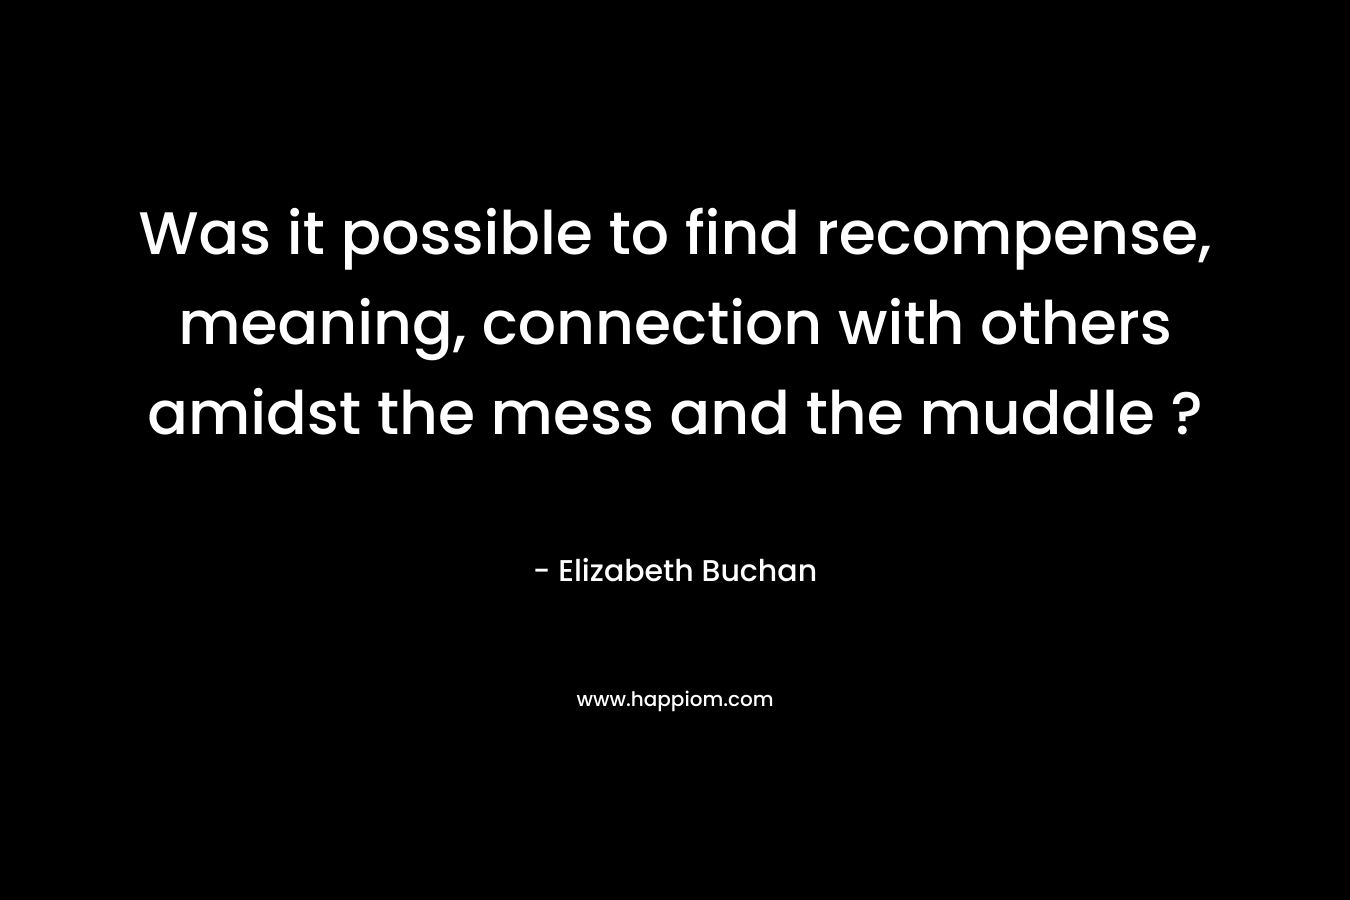 Was it possible to find recompense, meaning, connection with others amidst the mess and the muddle ? – Elizabeth Buchan